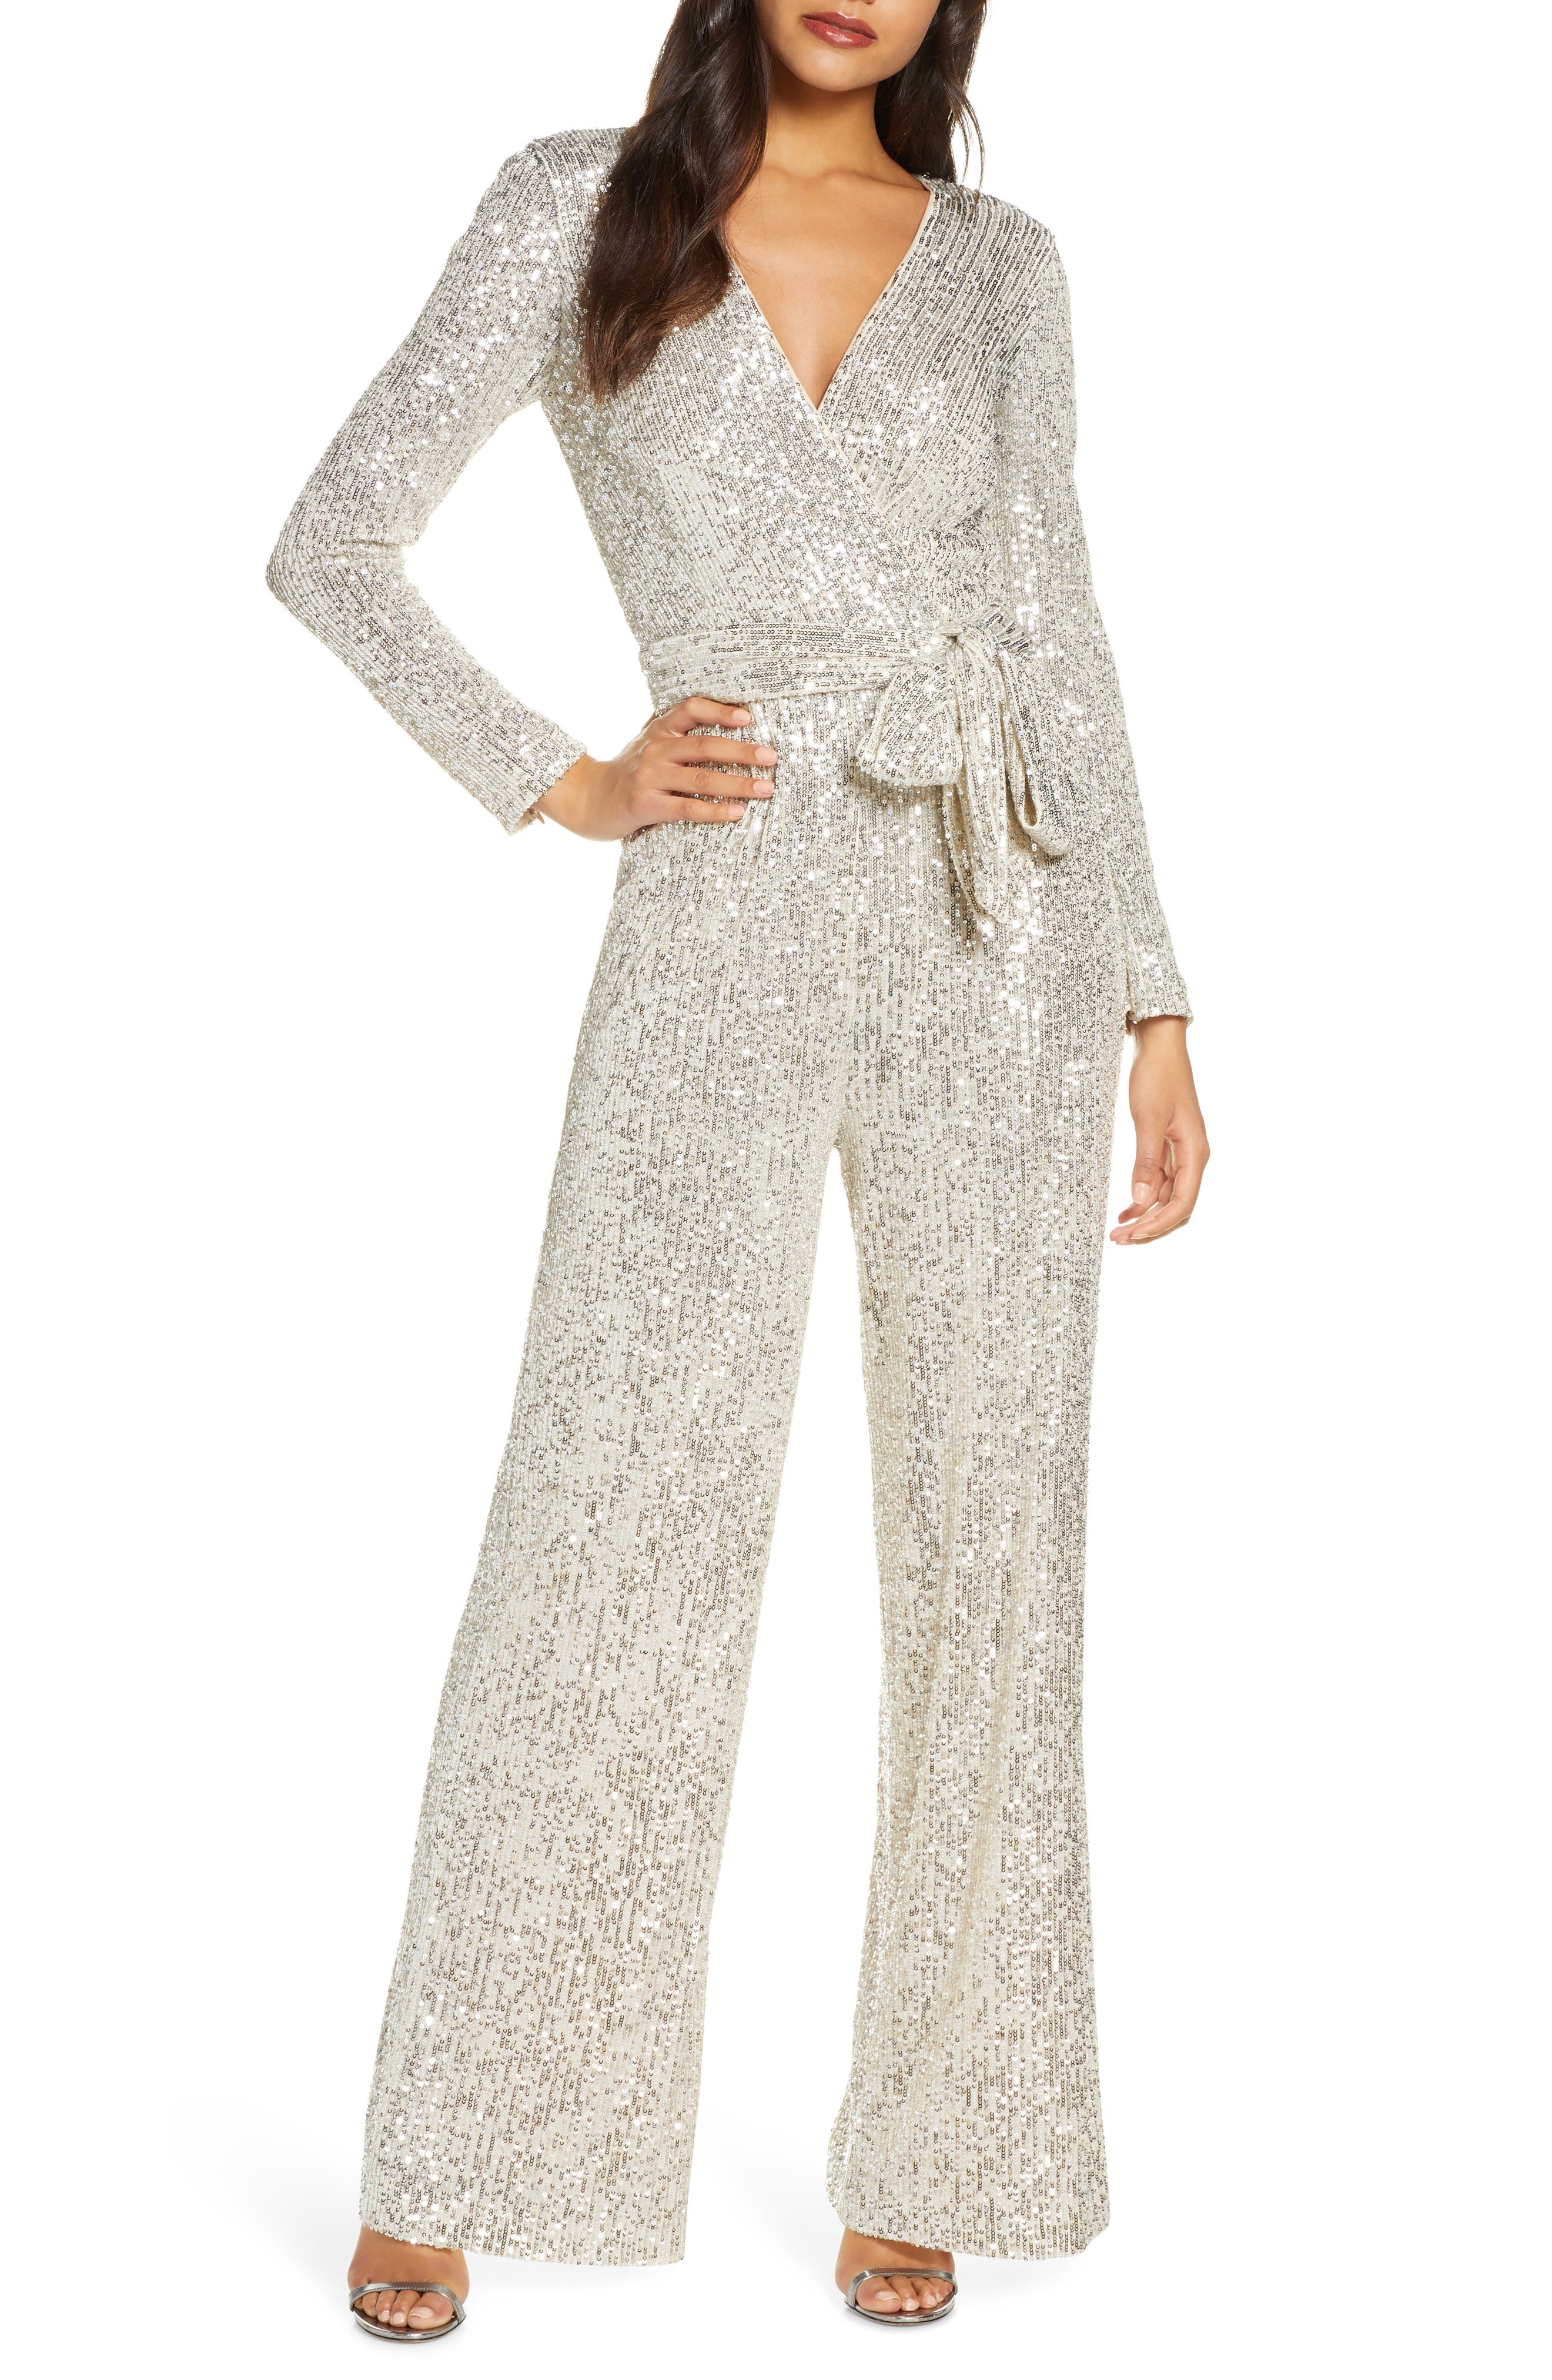 jumpsuit for night party